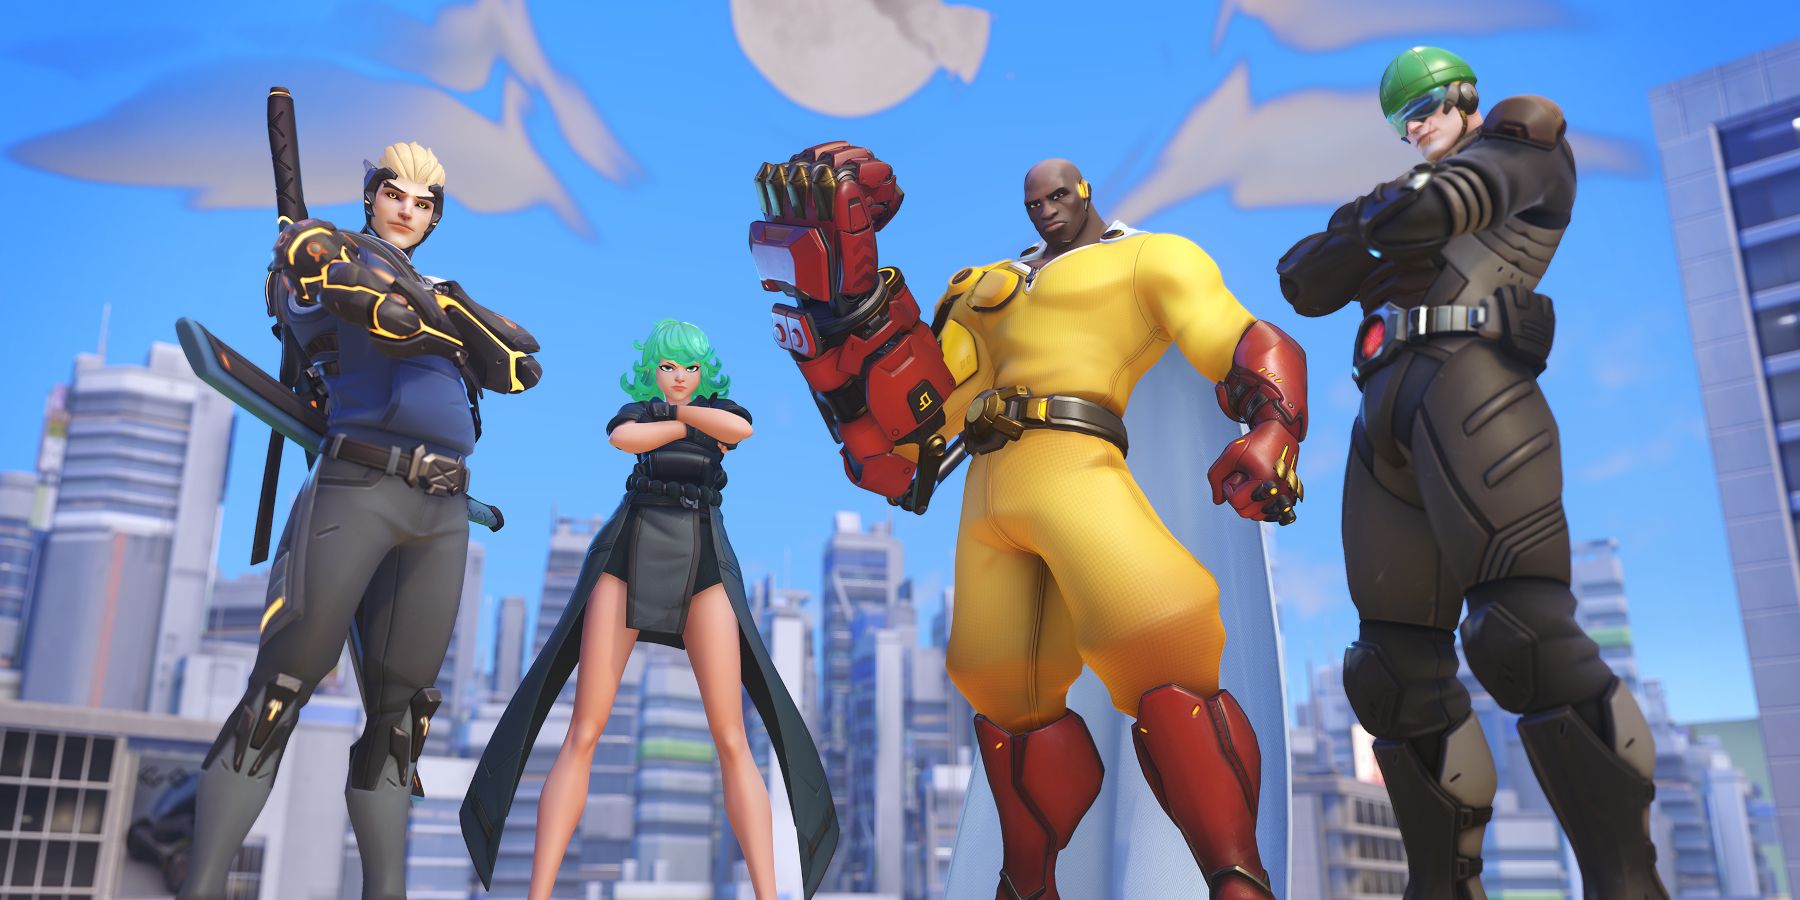 Overwatch 2 heroes dressed as characters from One-Punch Man